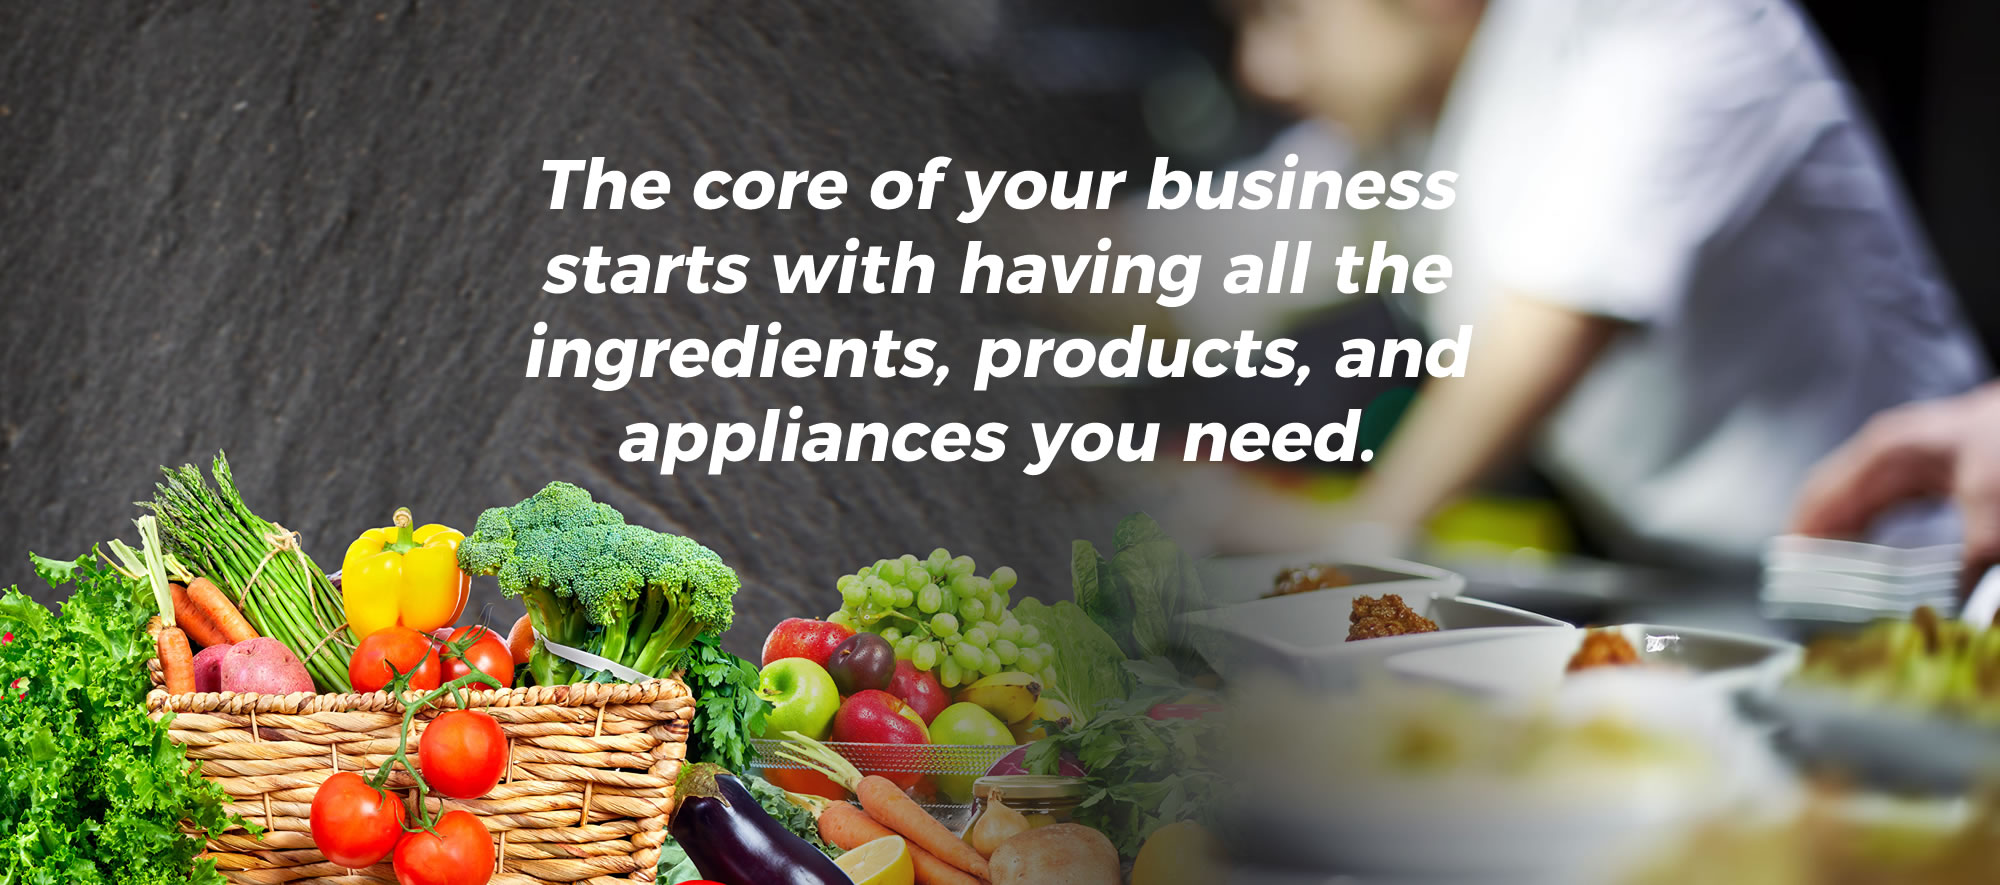 The core of your business starts with having all the ingredients, products, and appliances you need